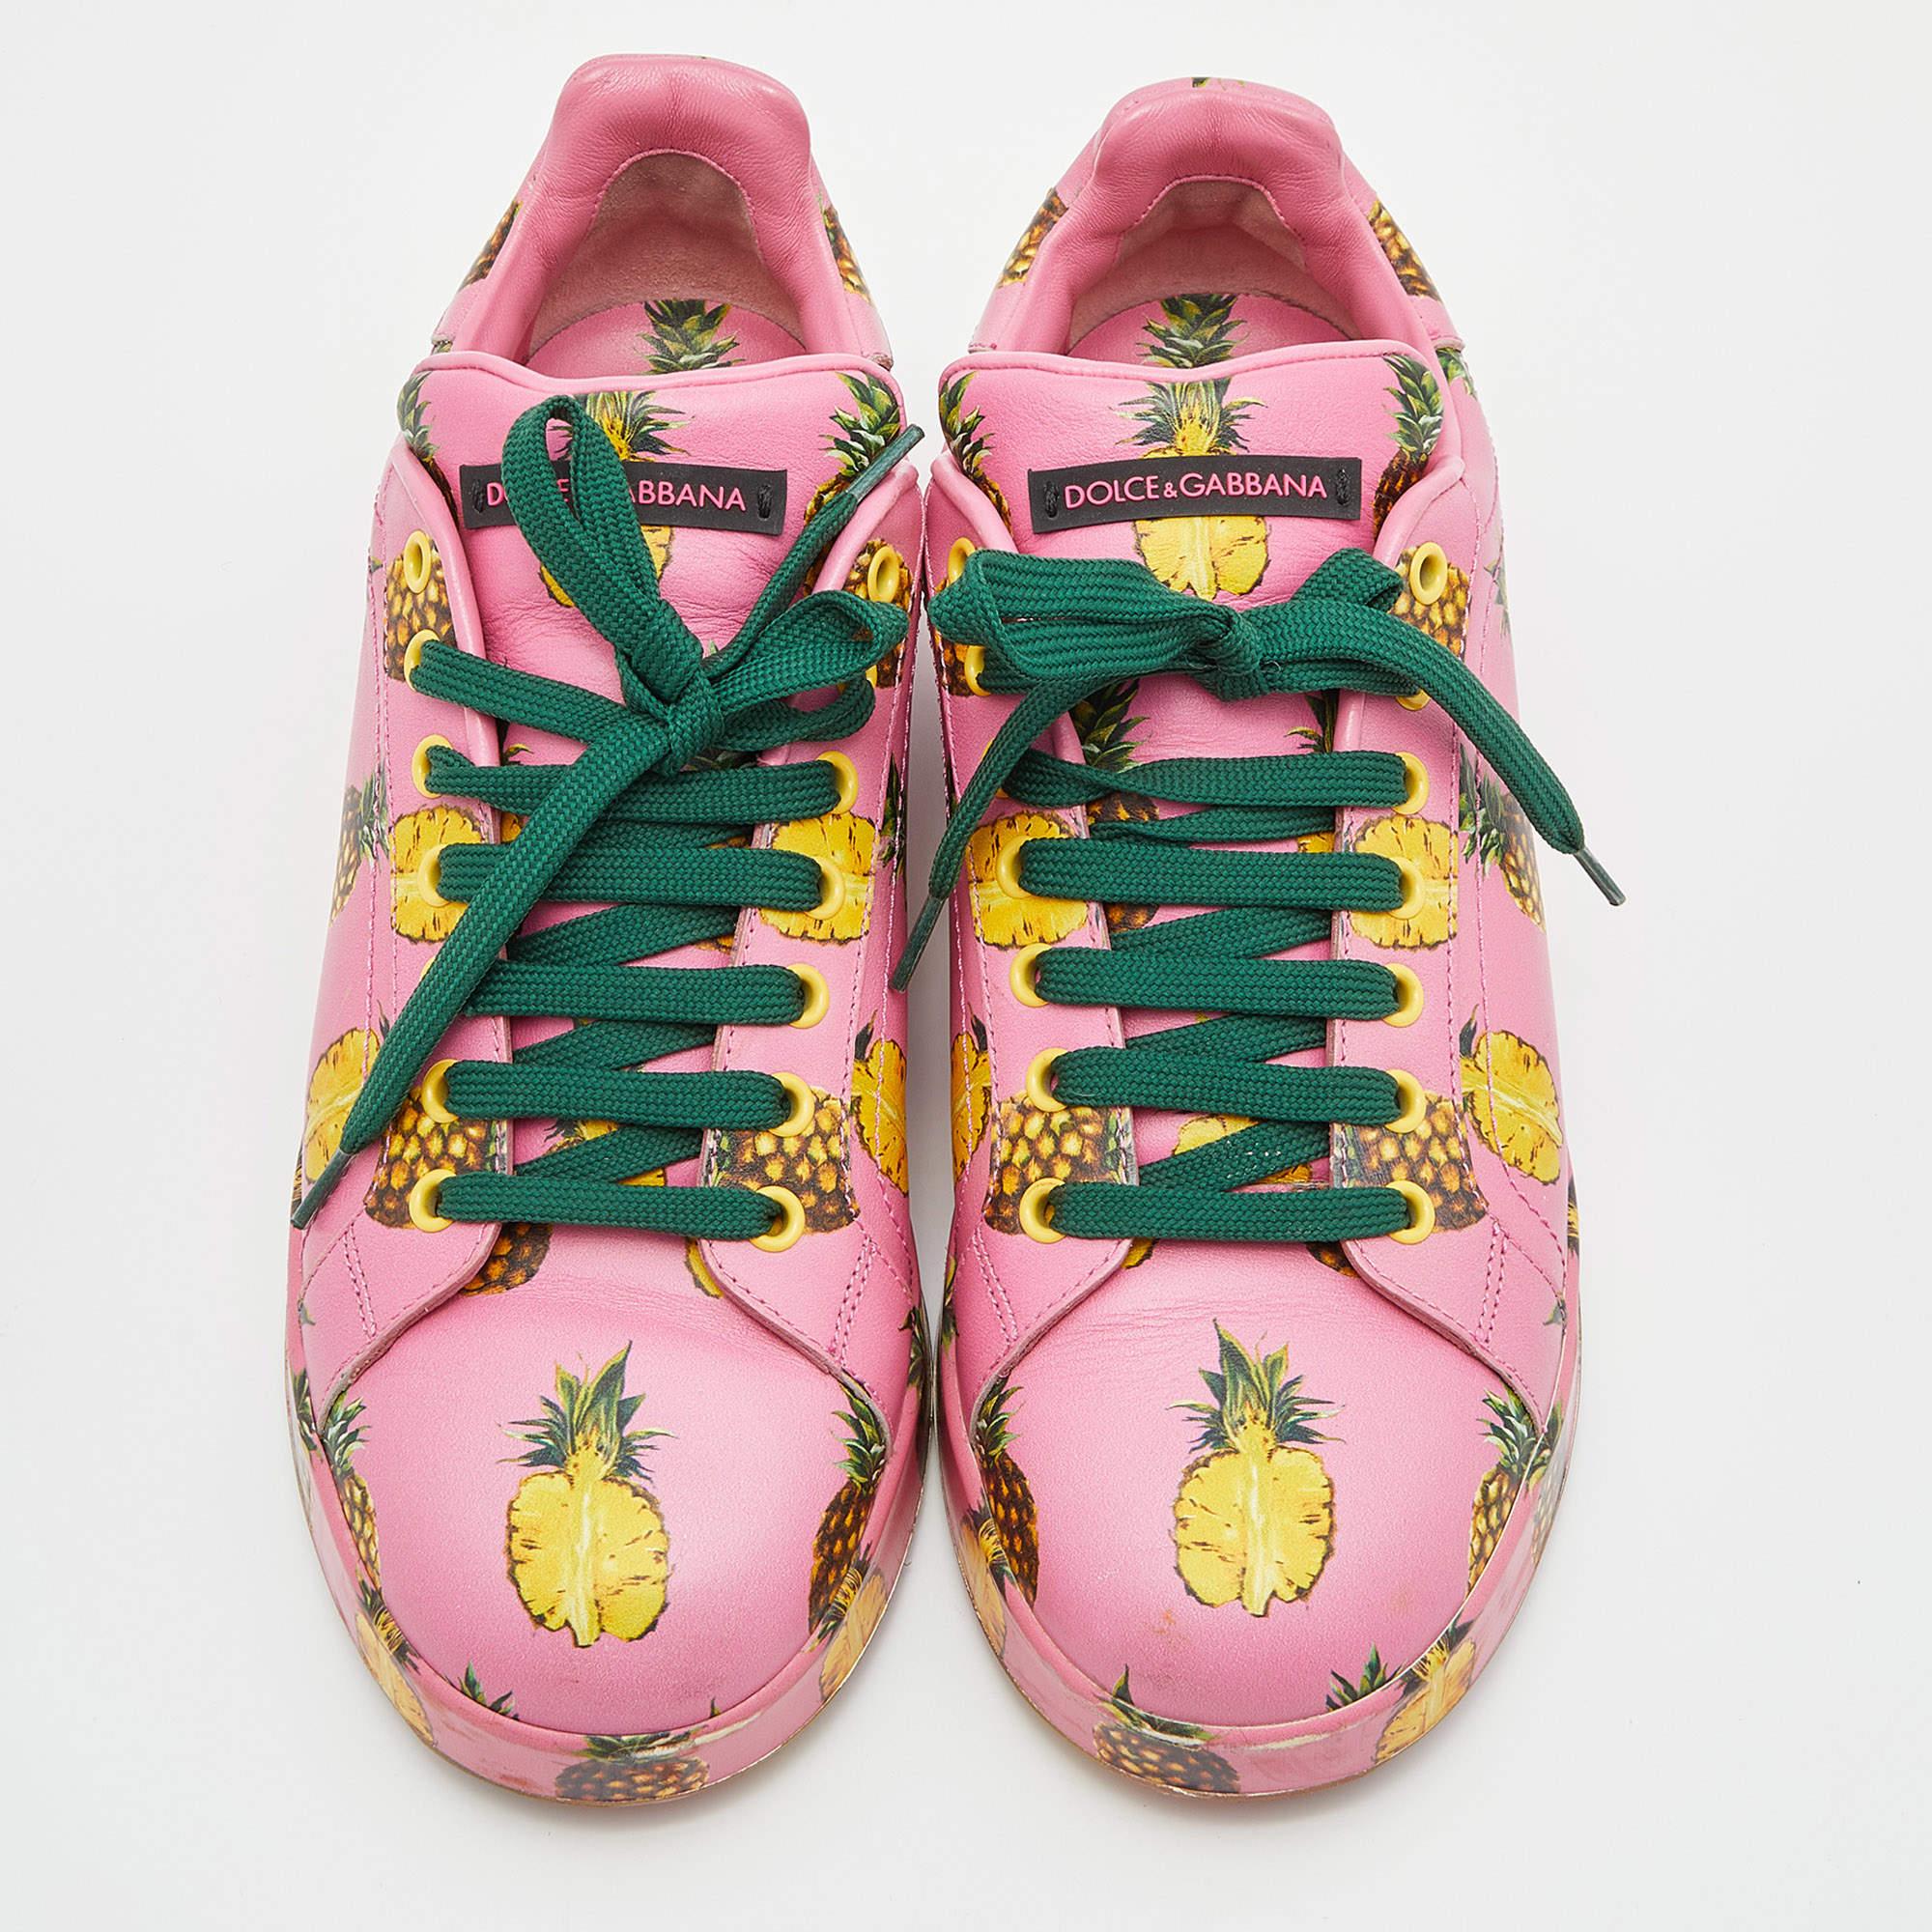 You can look bright as the sun by wearing these low styled sneakers from Dolce & Gabbana. It is made from pink leather and has a fine print of pineapples all over. This laced up pair of shoes carries the brand name on the tongues and counters. They